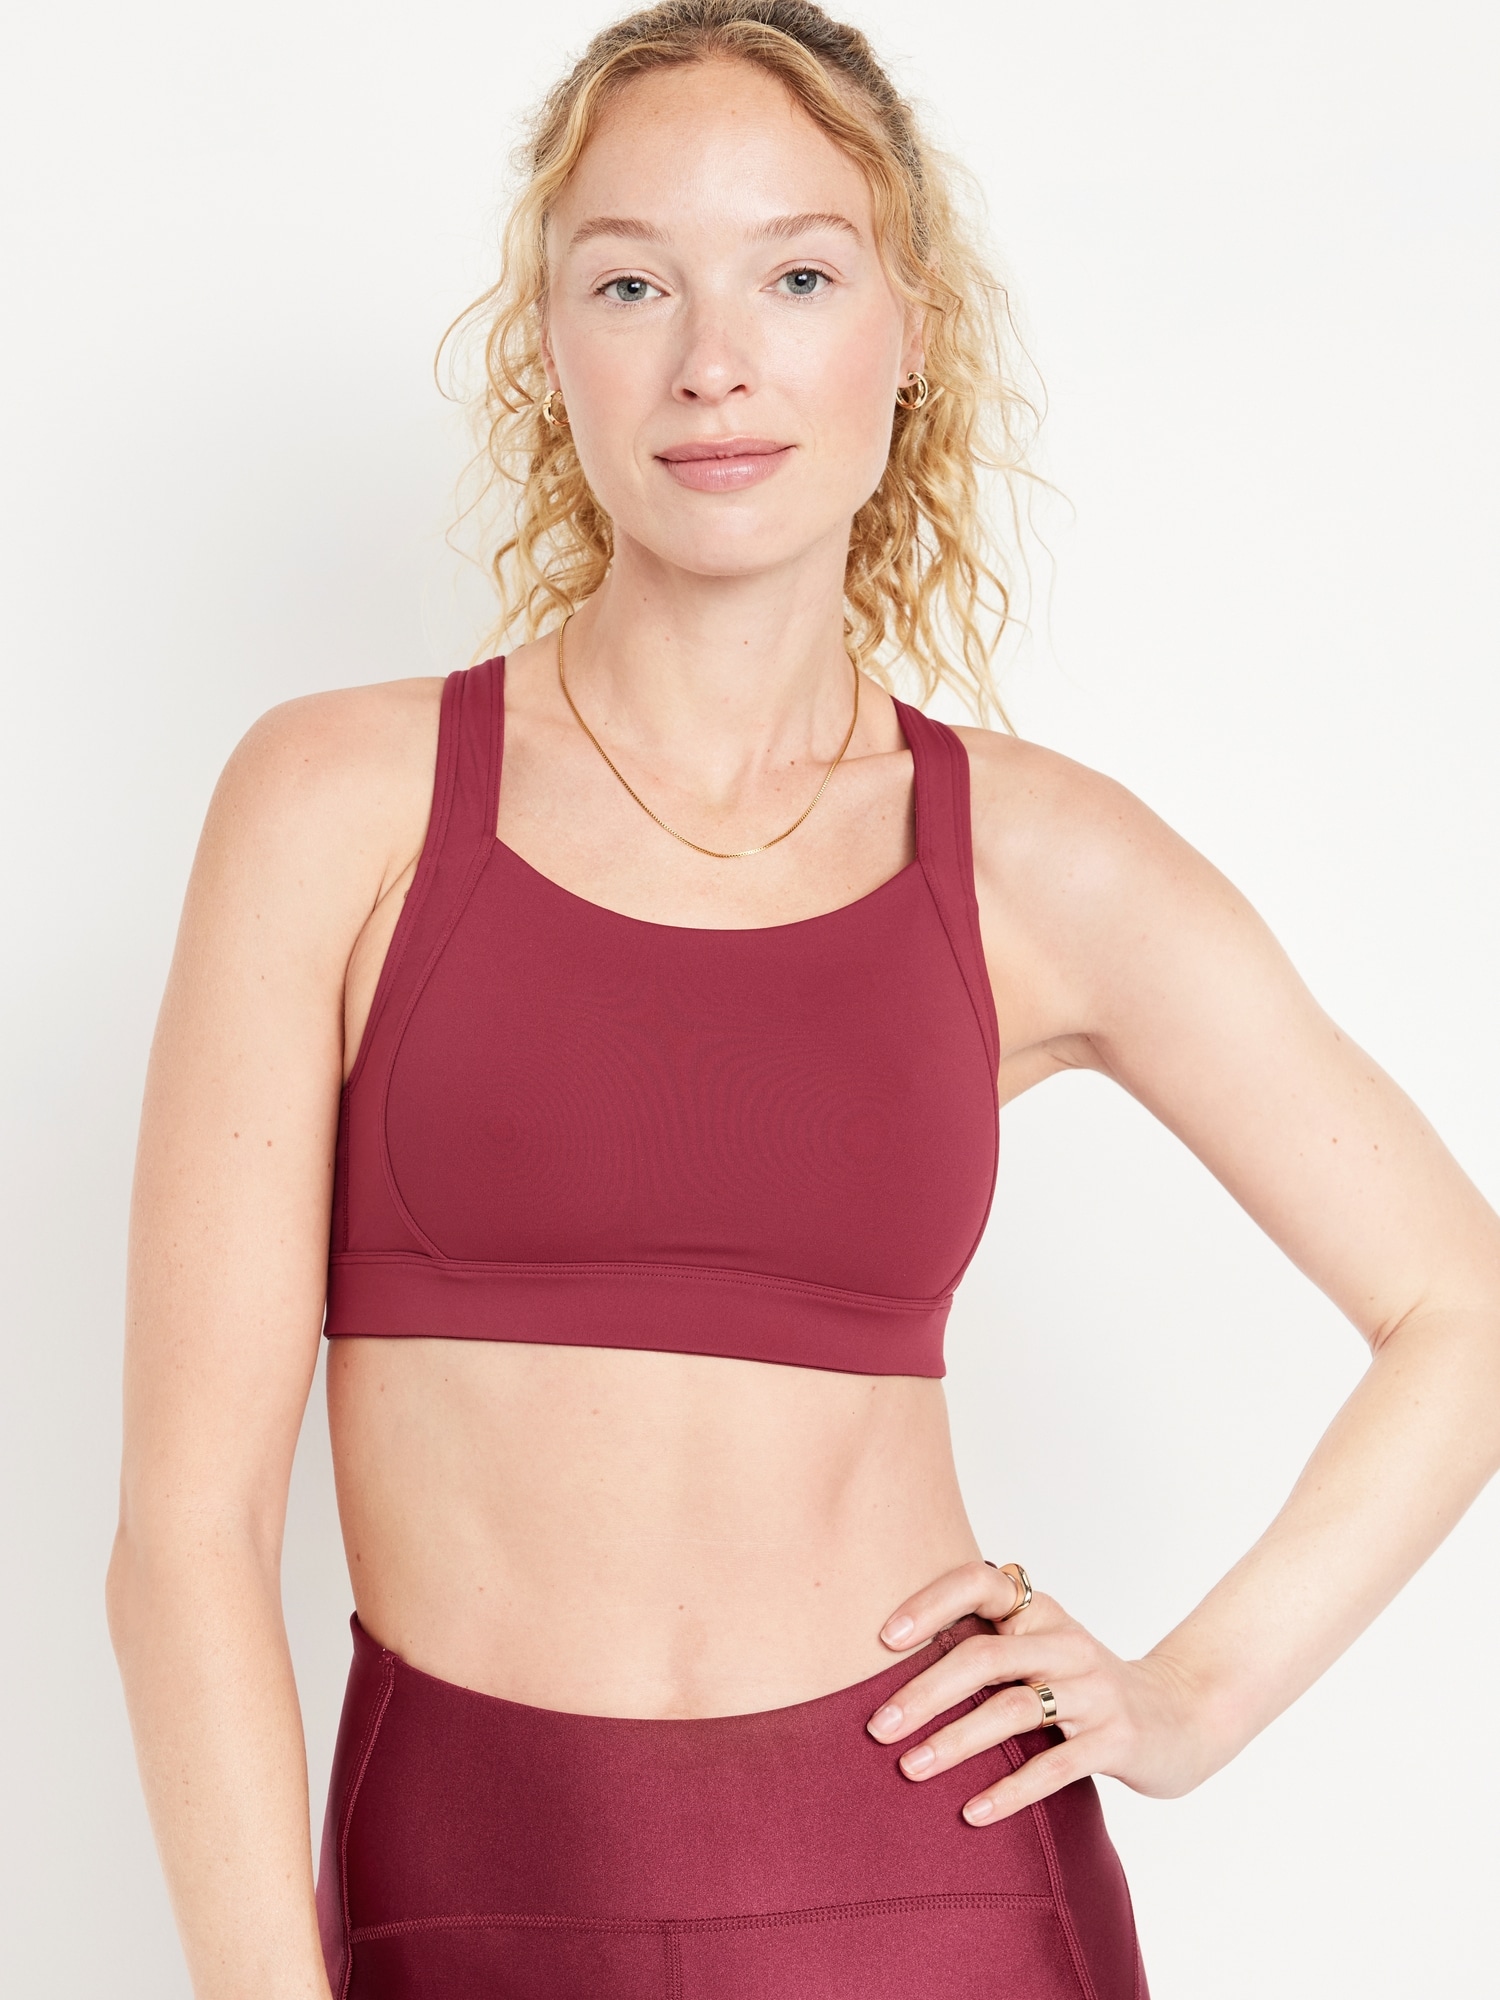 Old Navy - High-Support PowerSoft Zip-Front Sports Bra for Women 38DDD-48D